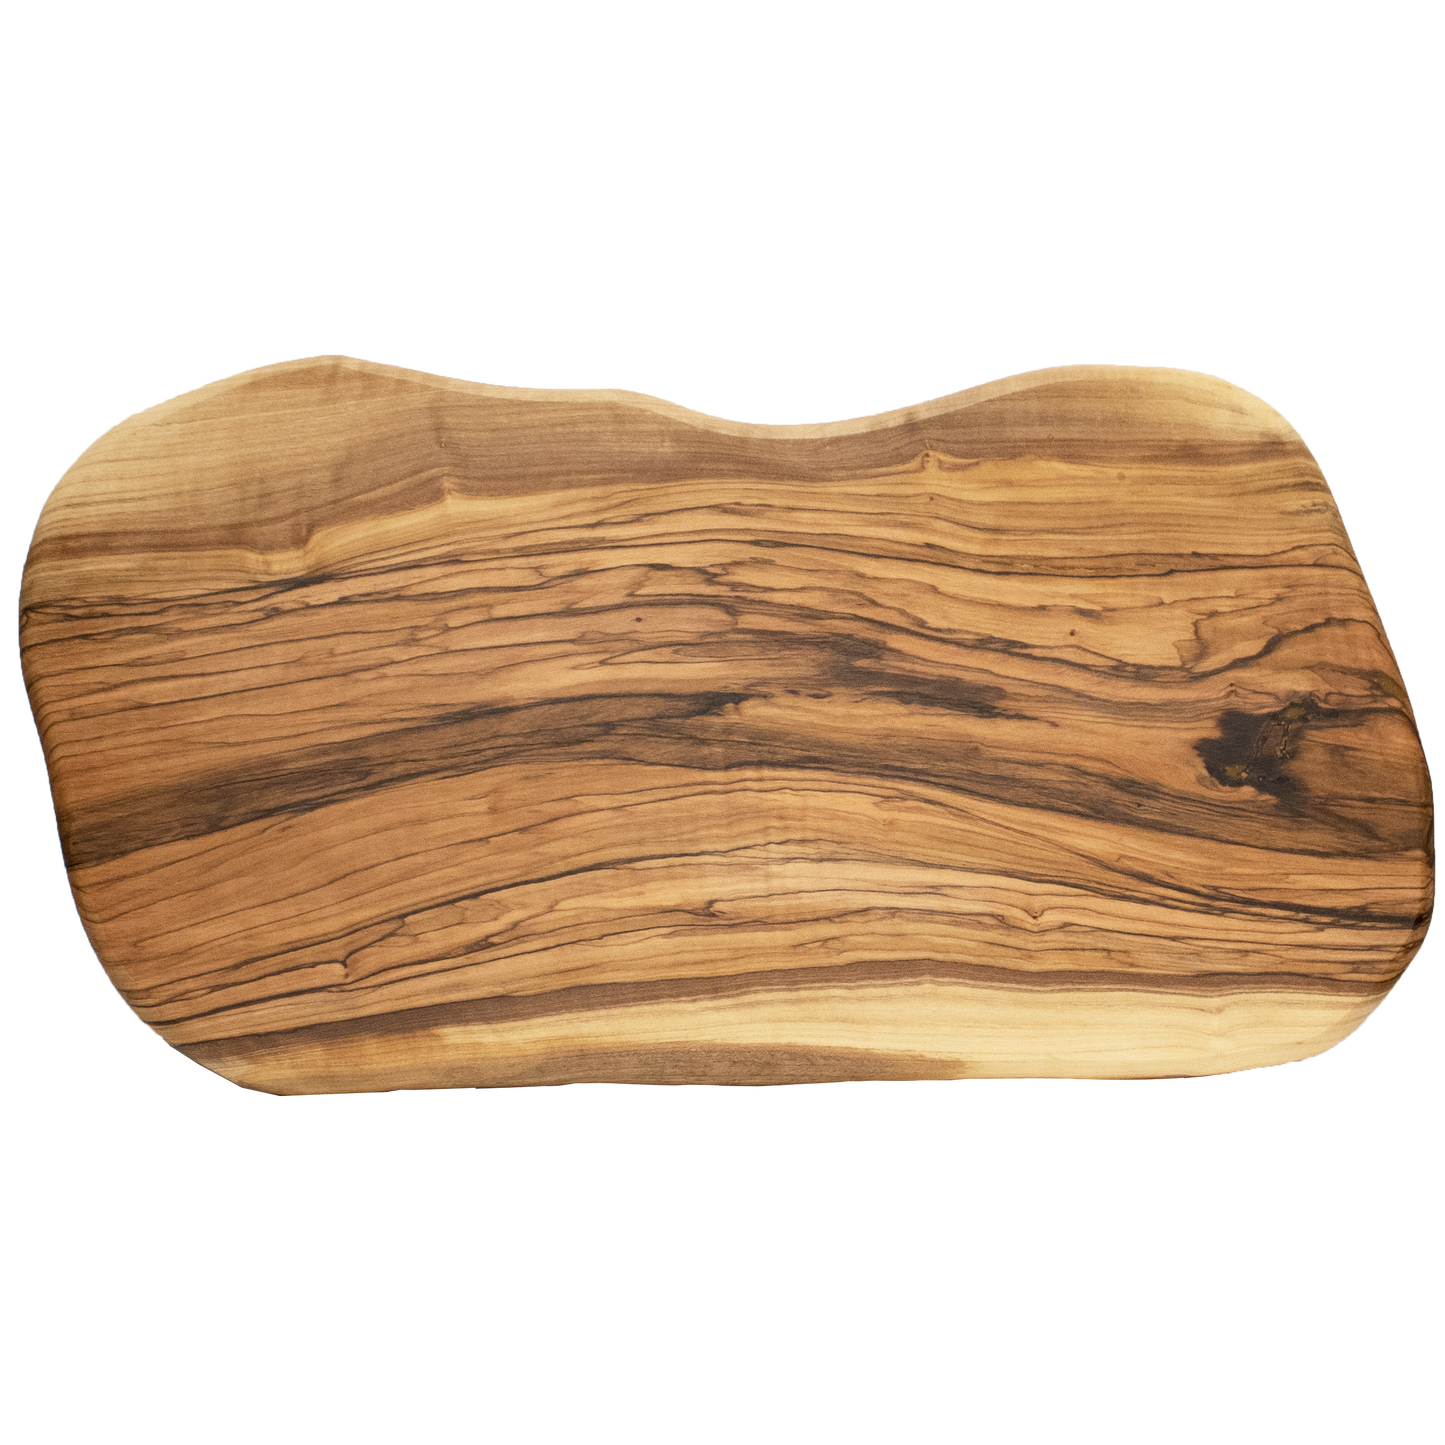 Small Solid Olive Wood Cutting or Serving Board with natural edges 